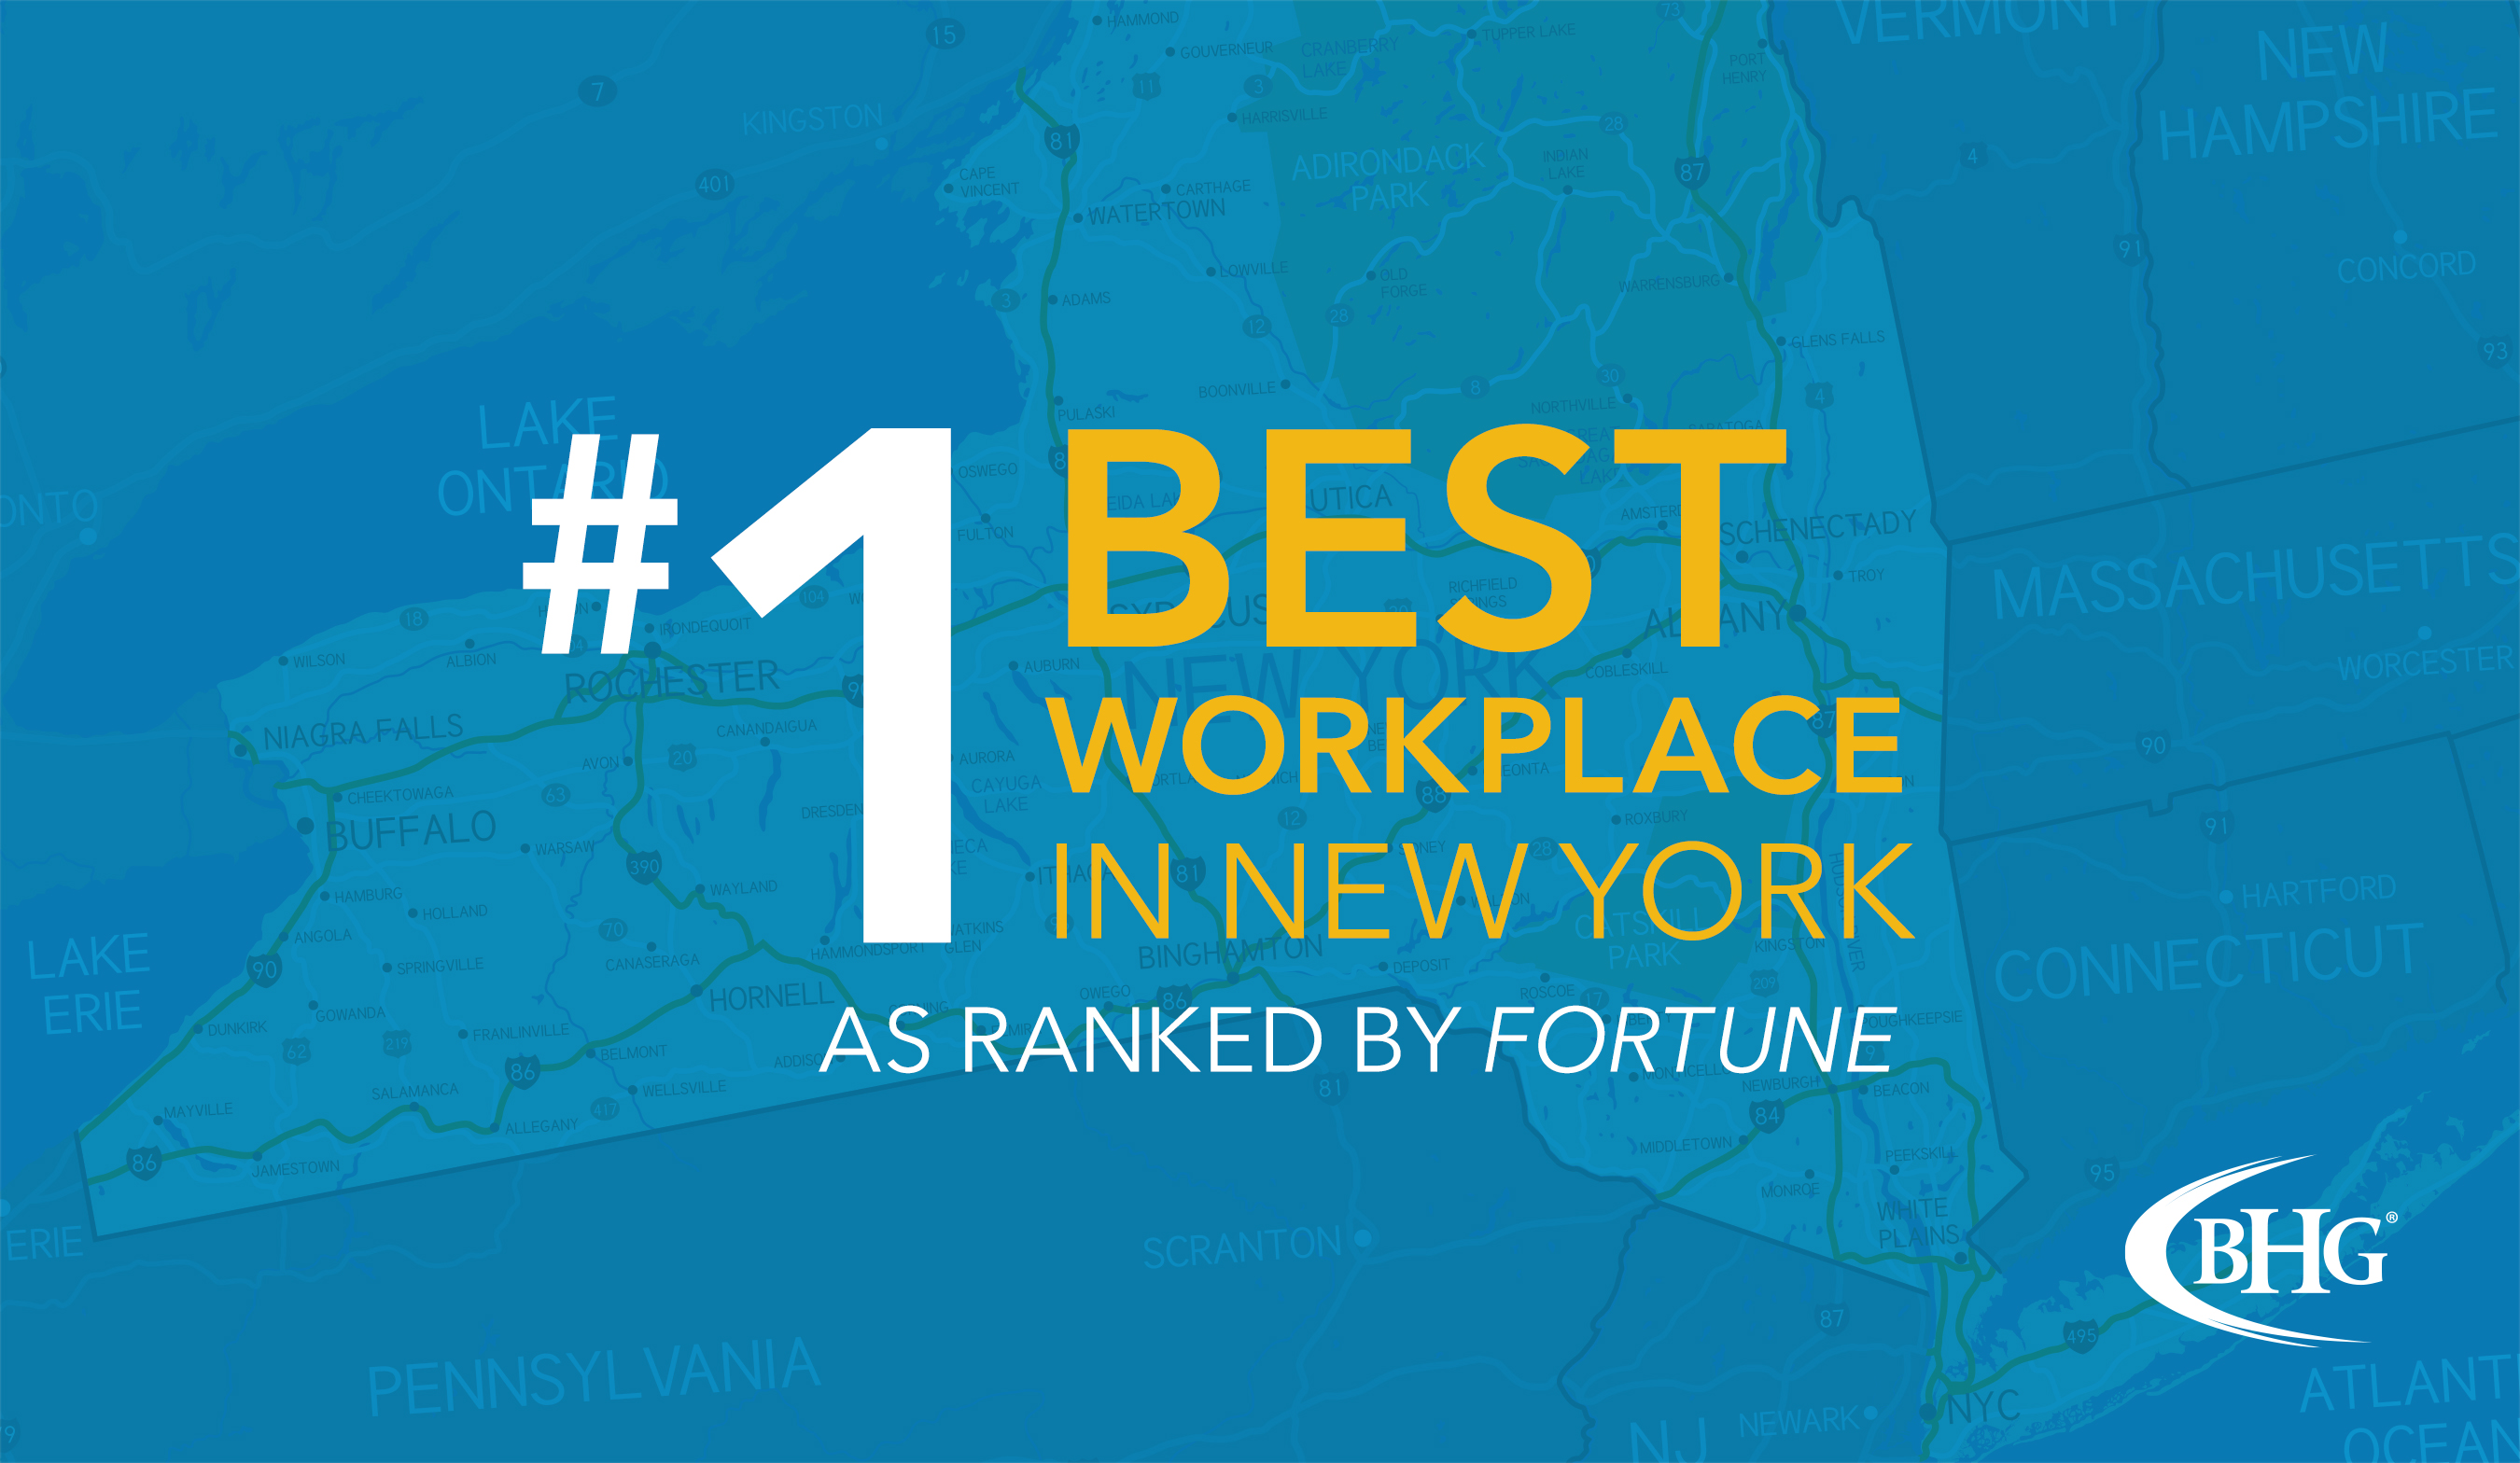 BHG Earns Top Spot as #1 2020 Best Workplace in New York by Great Place to Work® and Fortune Magazine